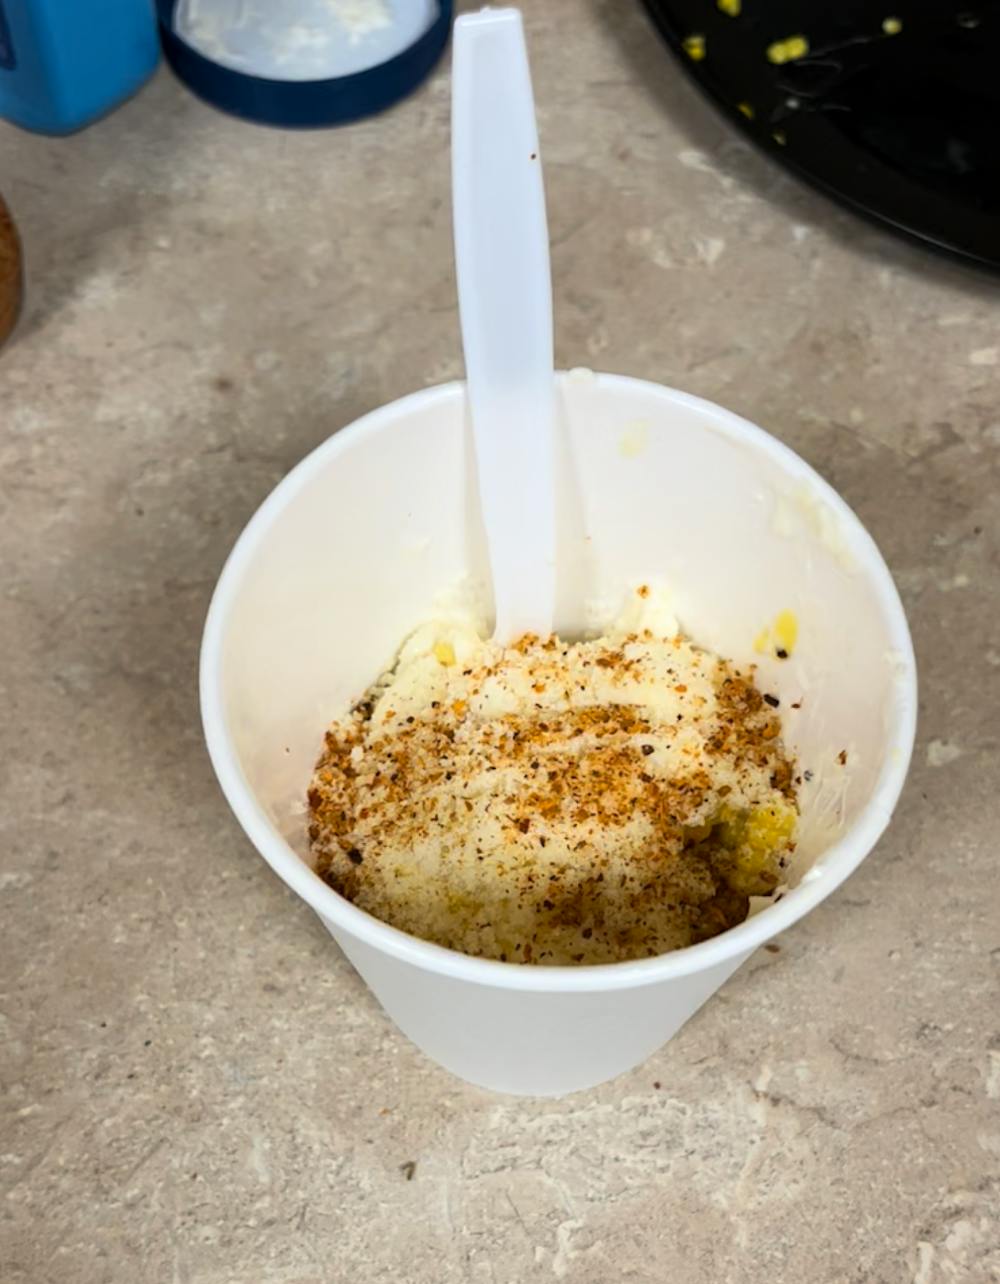 A version of elotes, a popular Mexican street food, can easily be made in your dorm.﻿